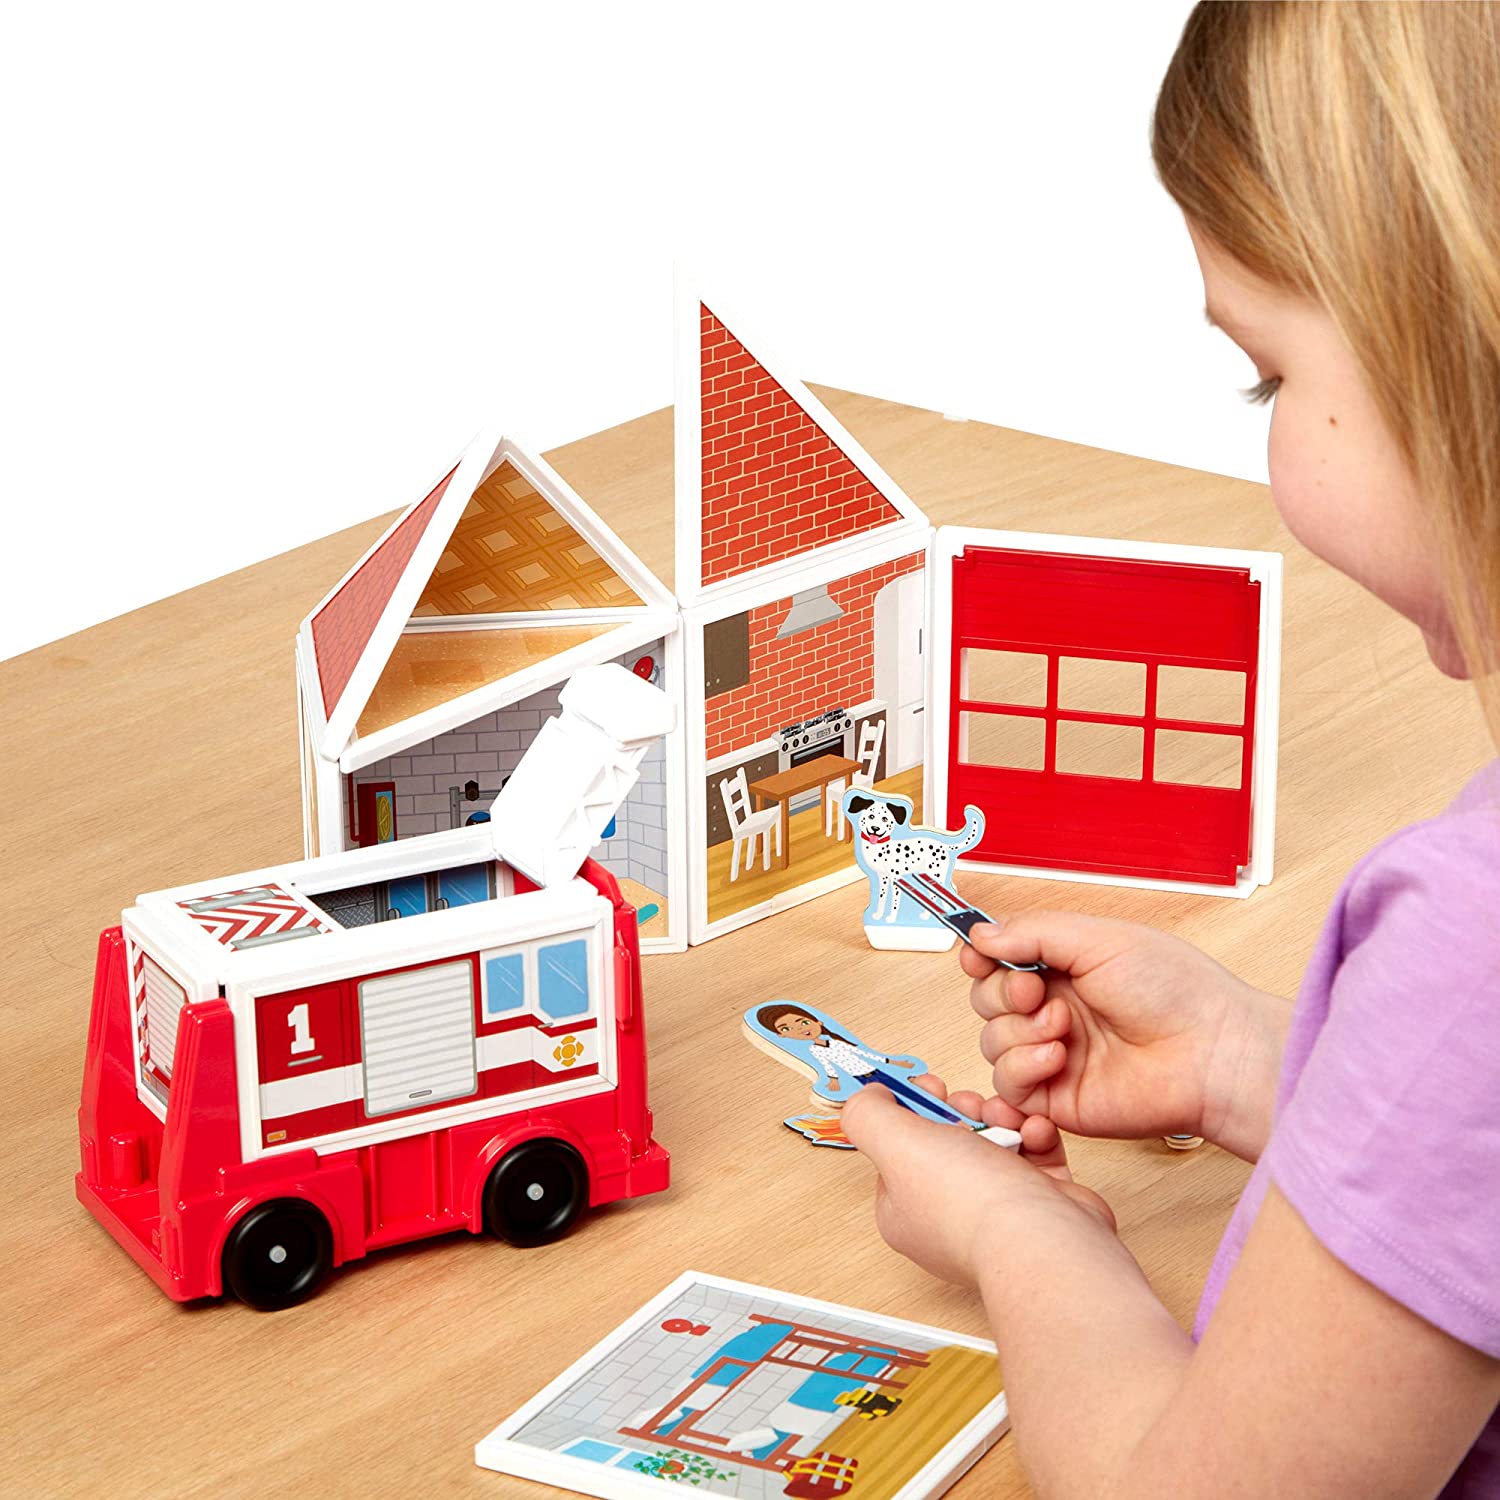 MELISSA & DOUG  Magnetivity Fire Station: Magnetivity™ encourages kids to experiment, explore, and imagine by inspiring them to design and build their own unique worlds - 30654